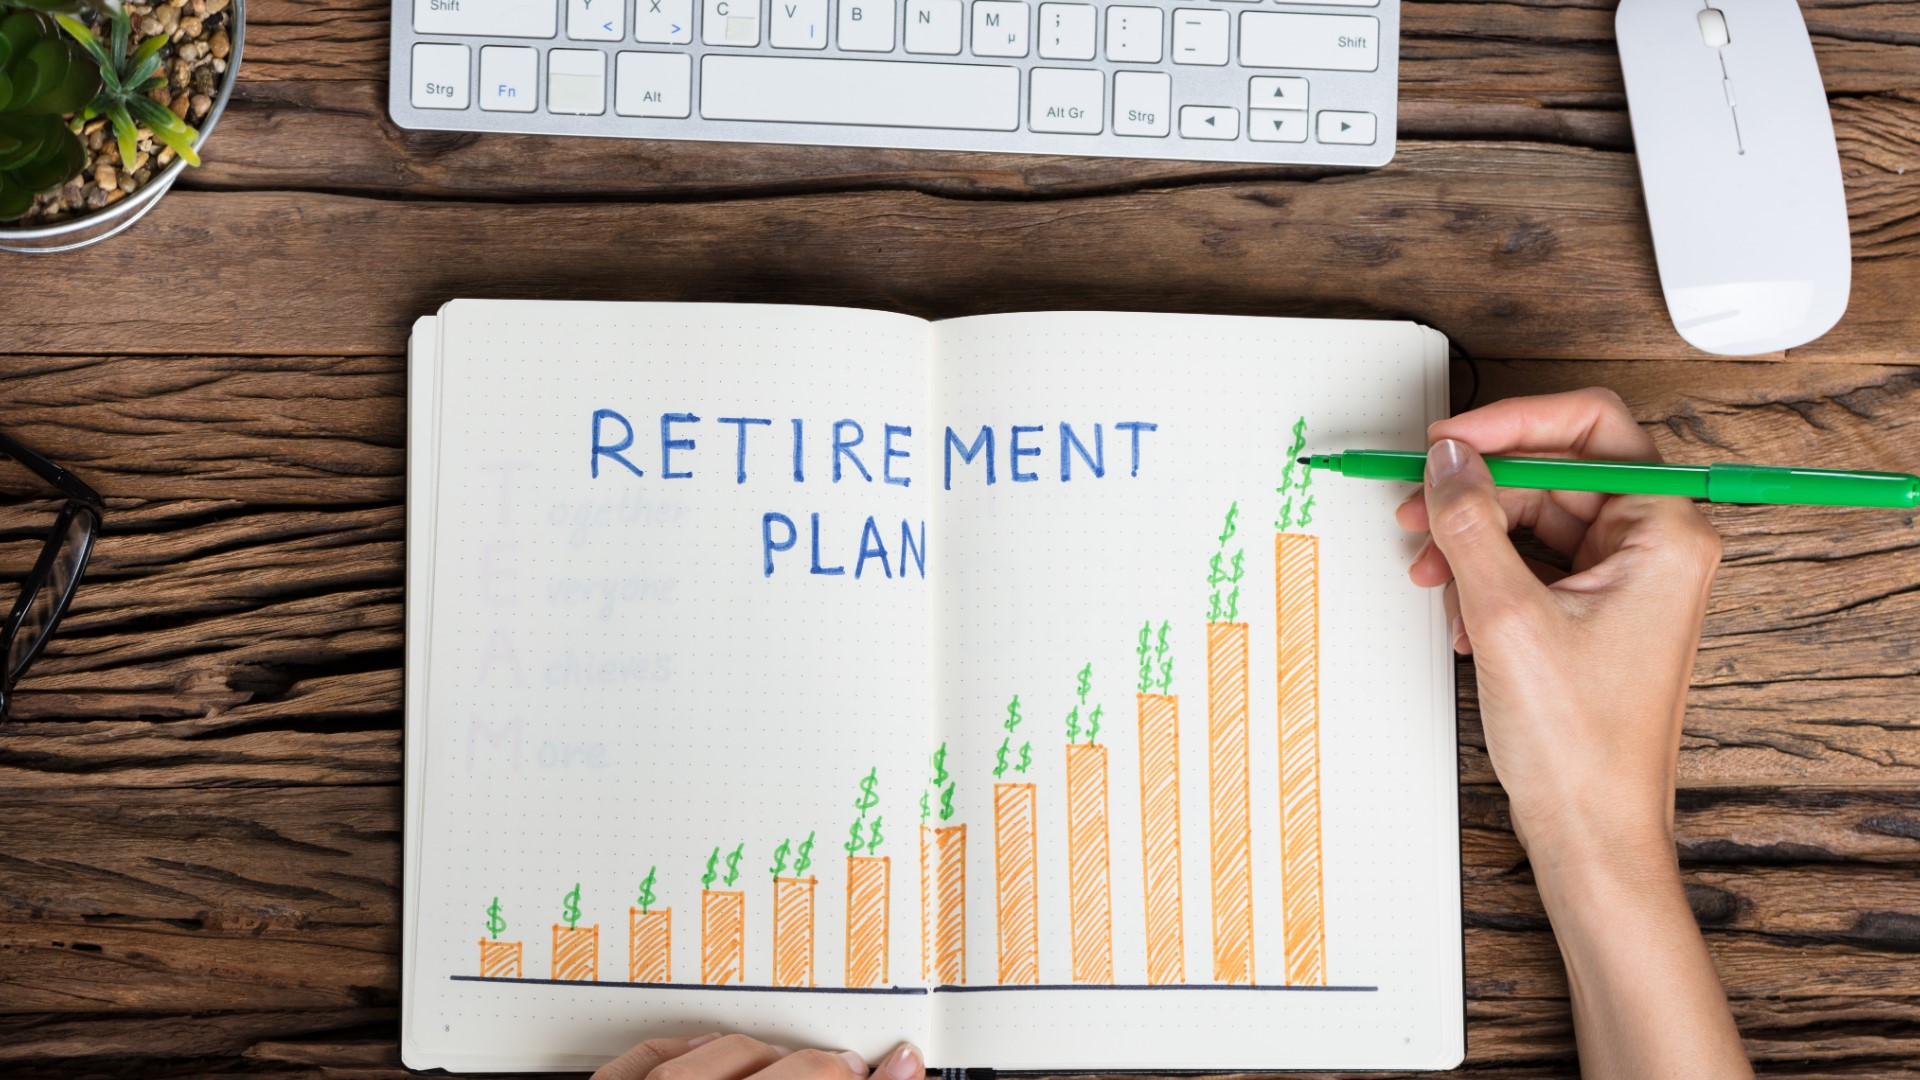 WHAT YOU COULD BE FORGETTING WHEN PLANNING FOR RETIREMENT